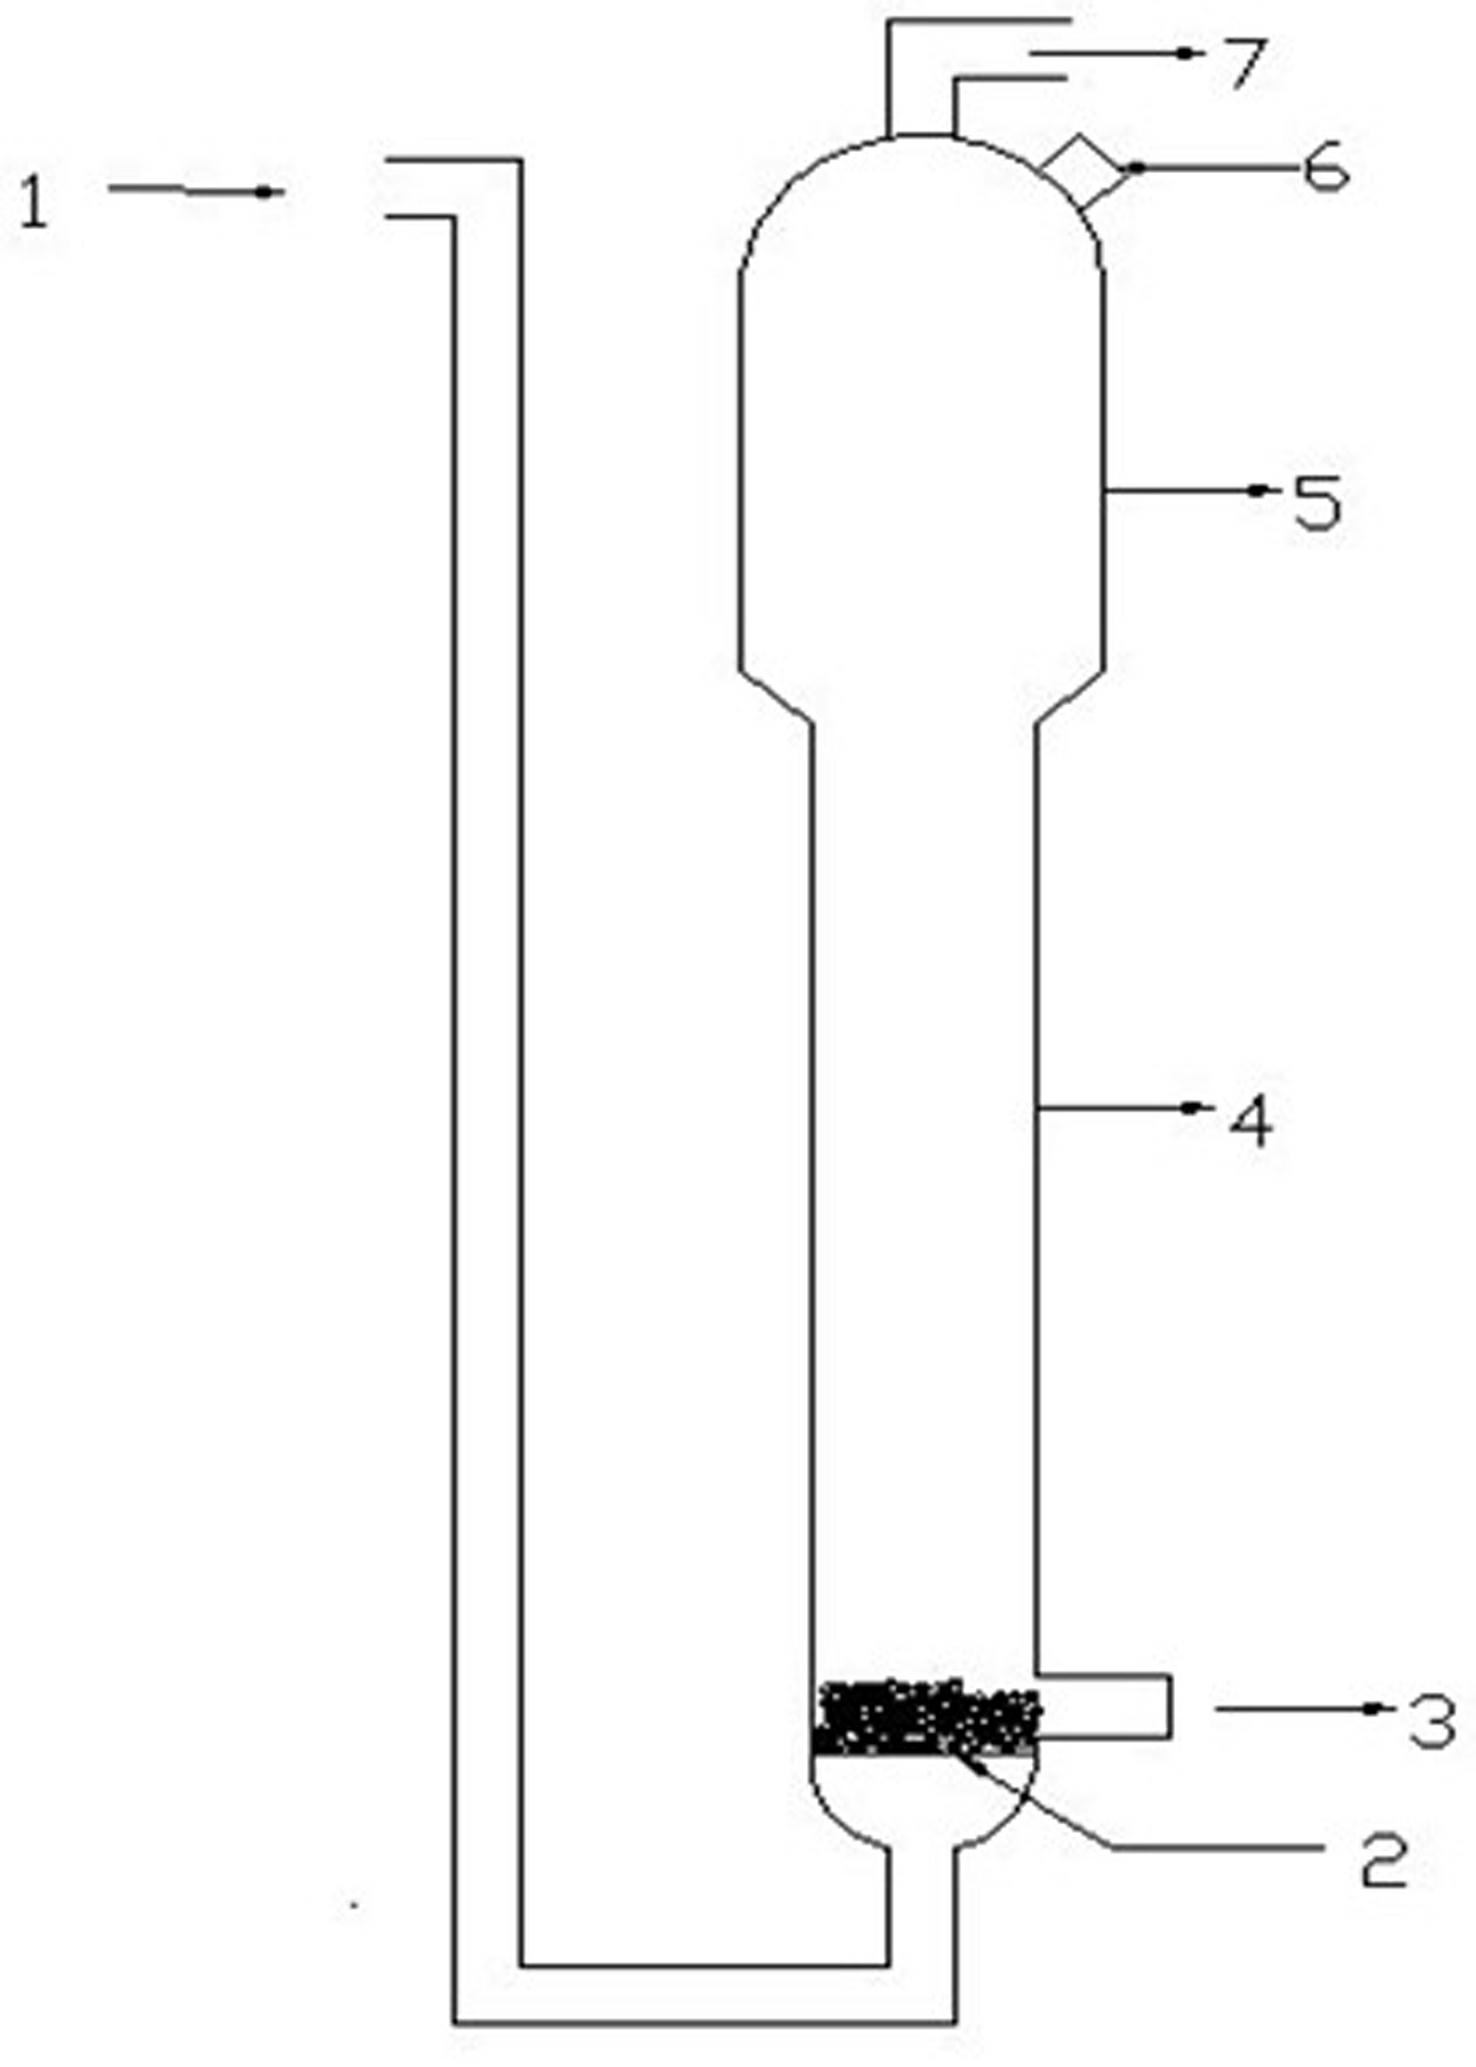 Slurry bubble column technology for preparing ethylene through acetylene hydrogenation and device thereof